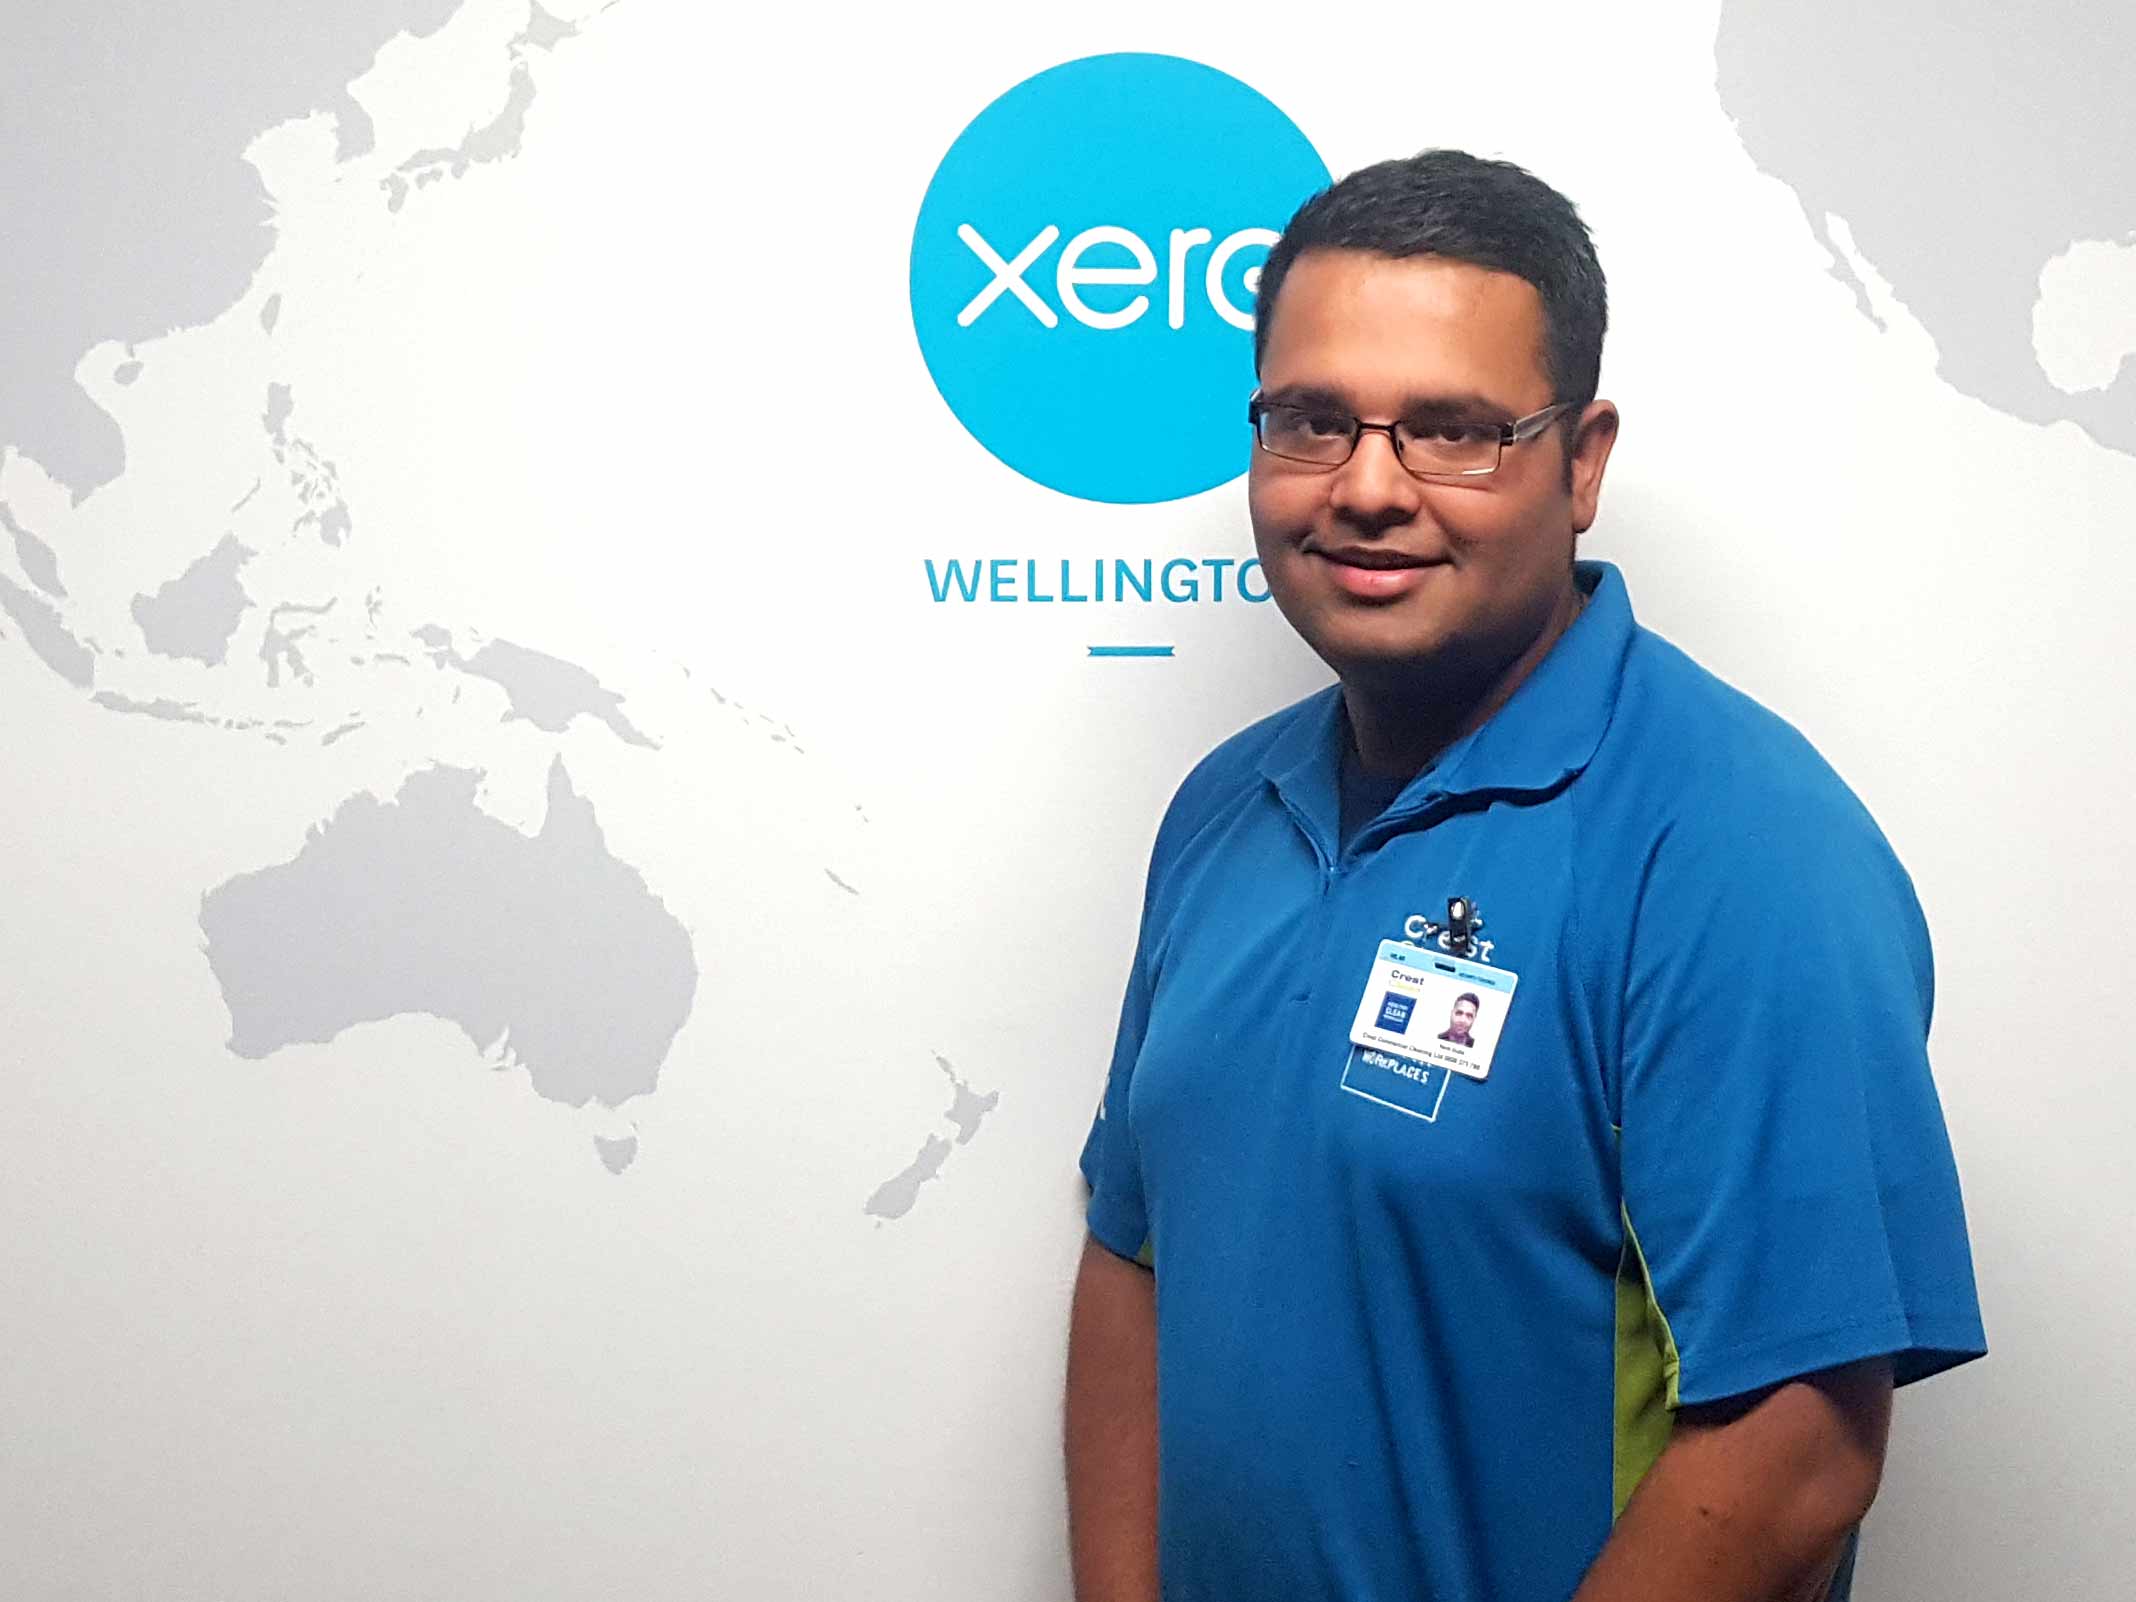 Naval Gupta loves working at Xero where he says he's treated like a member of staff.